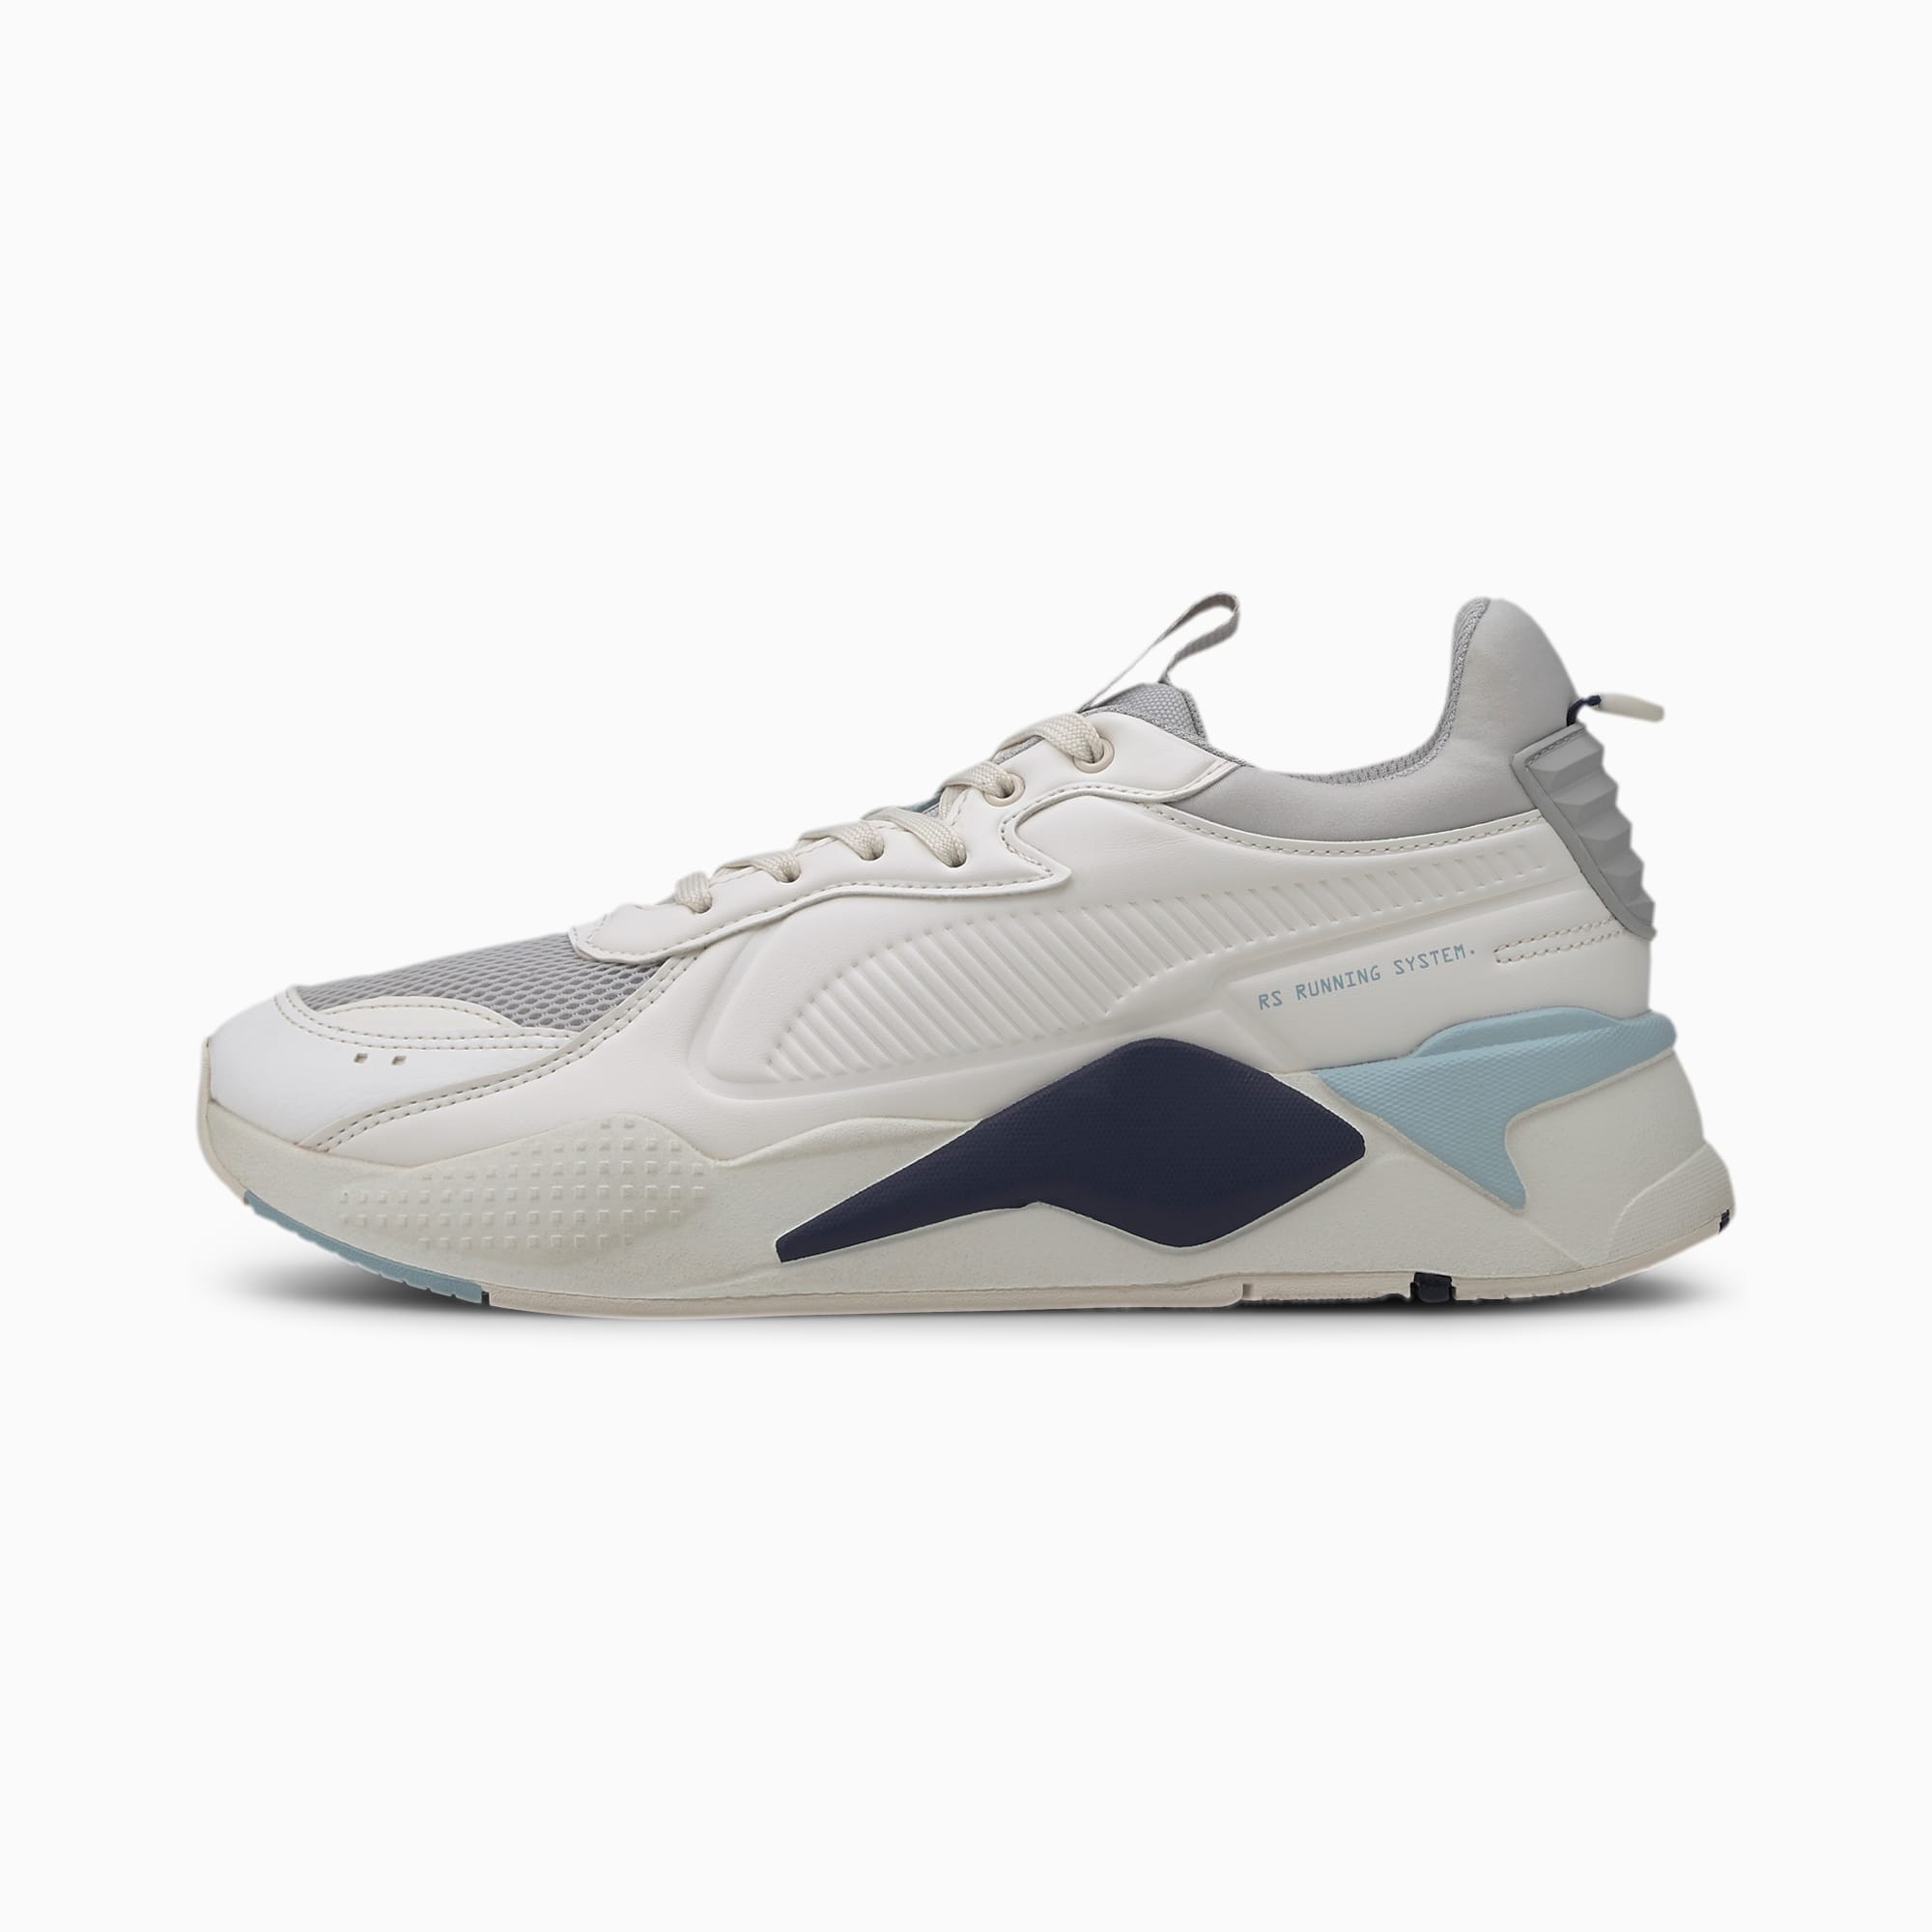 puma match low sneakers whisper white